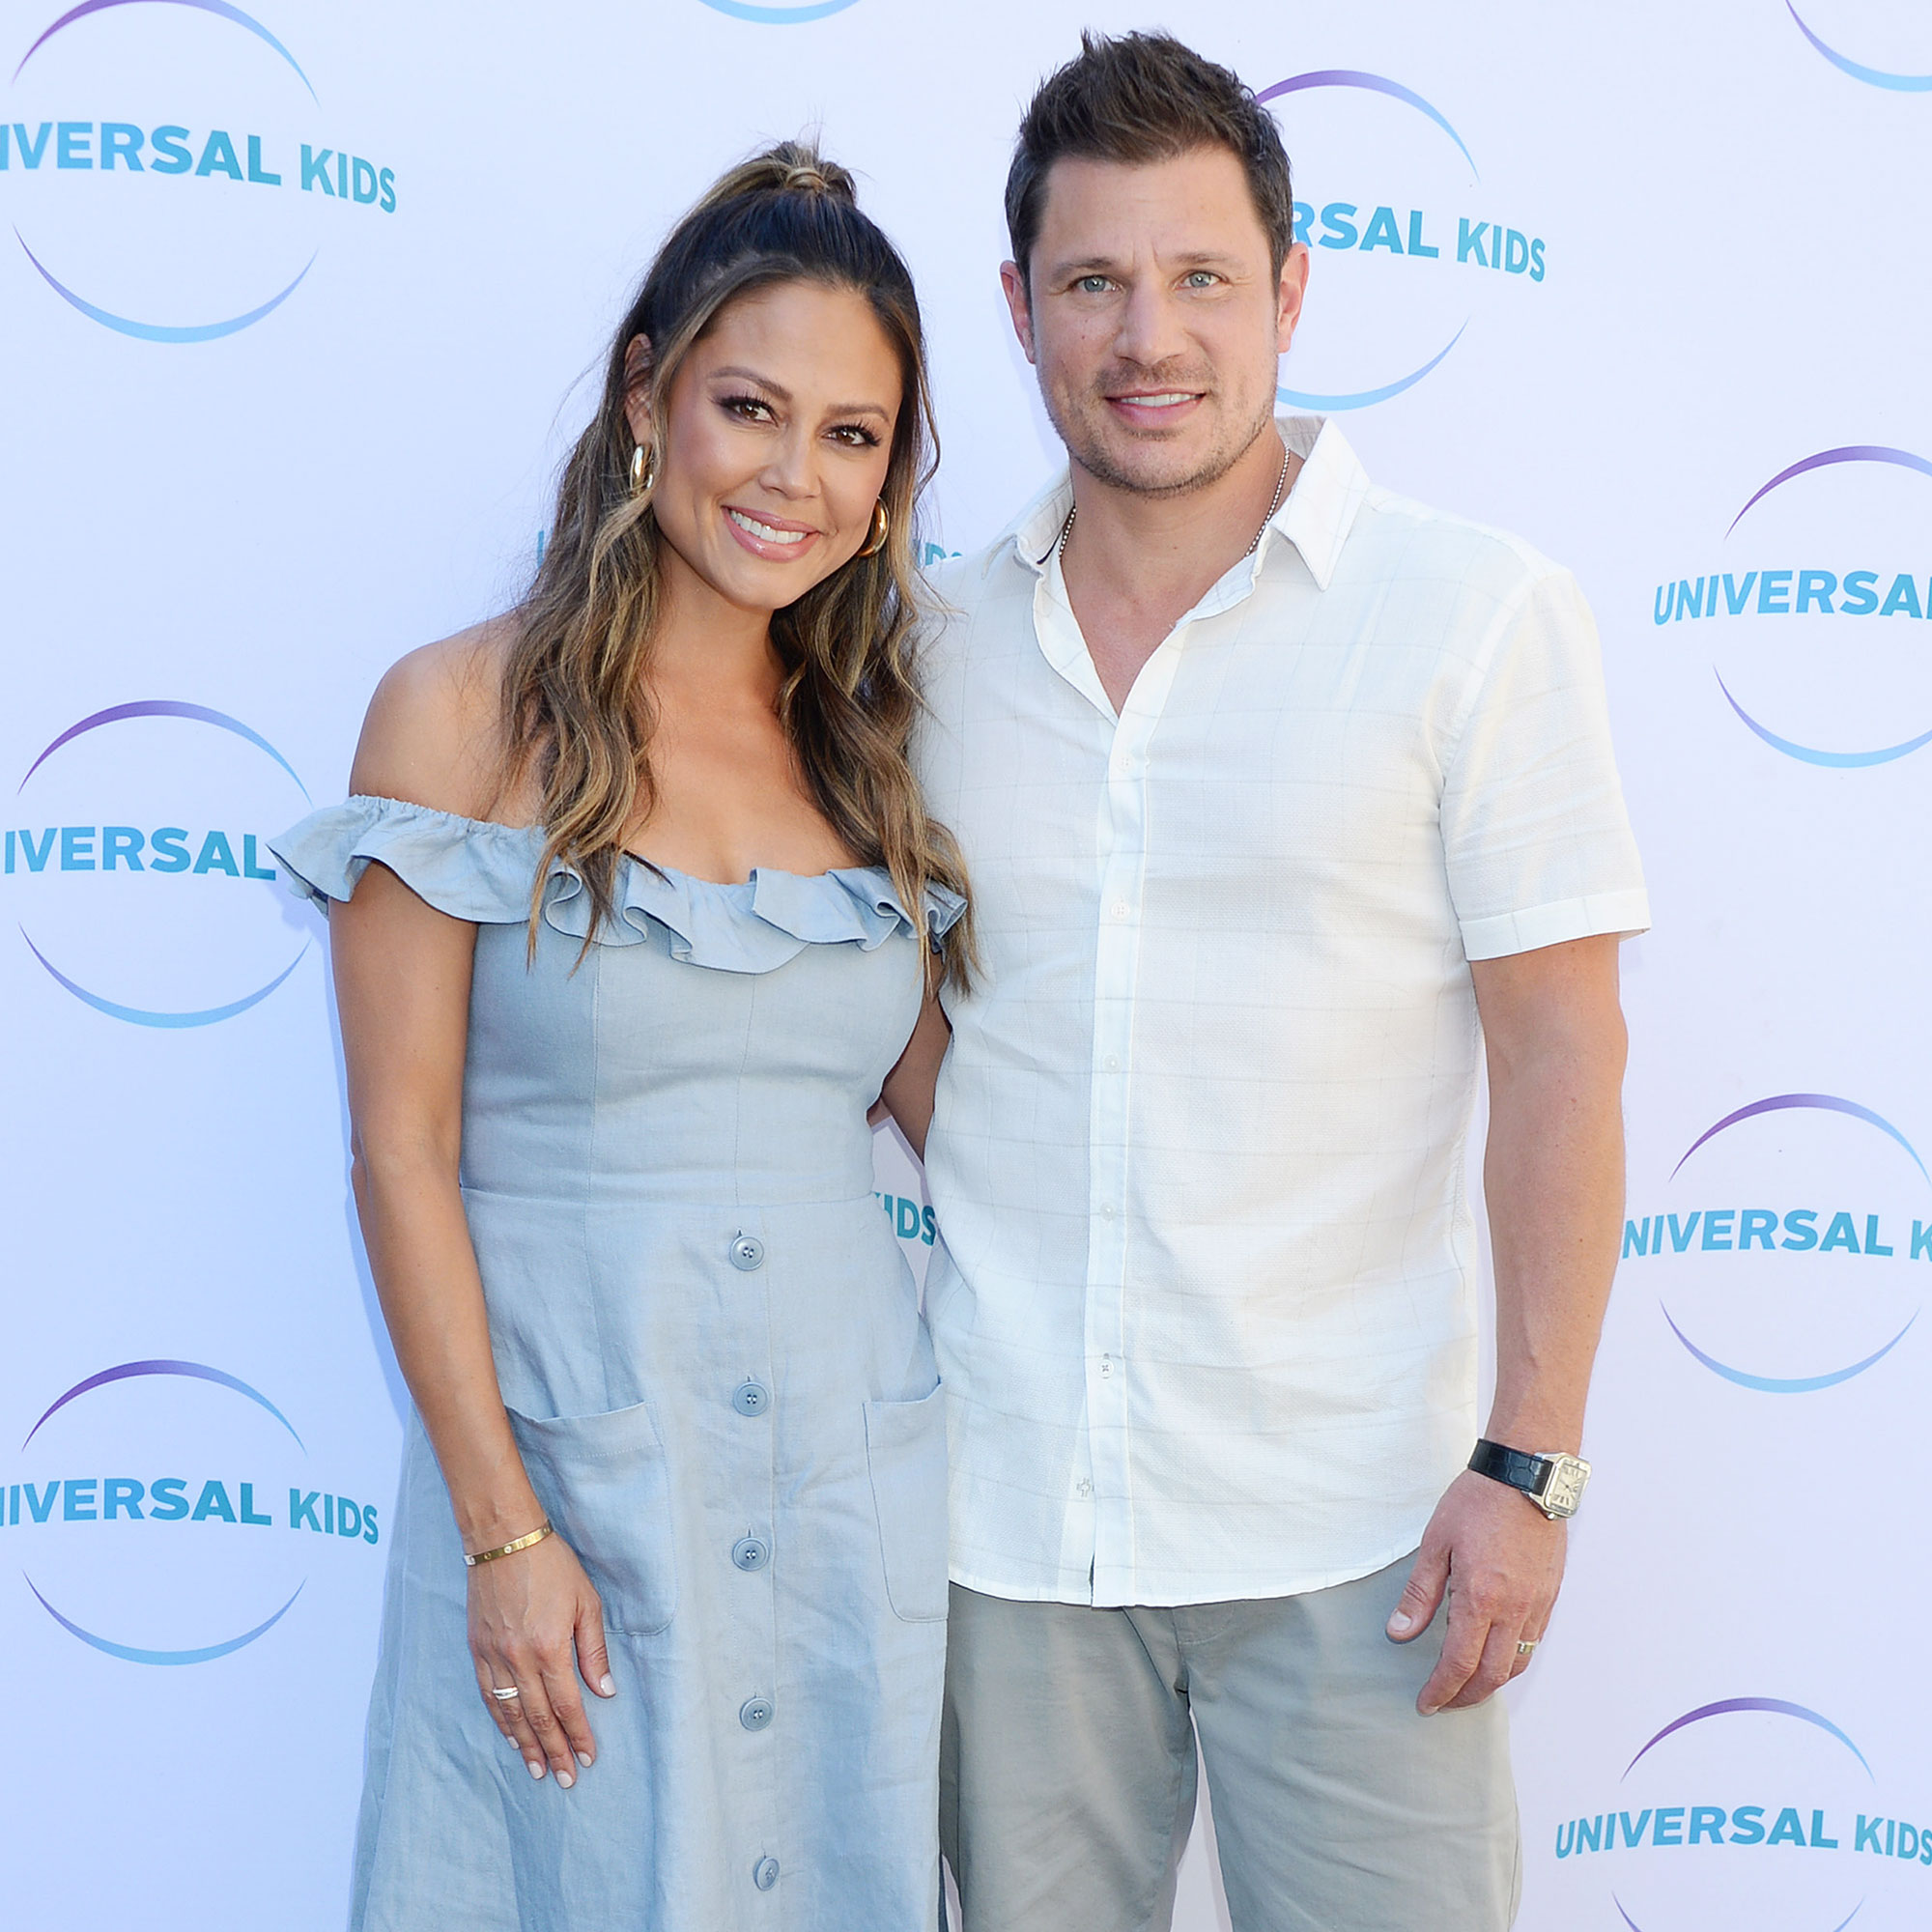 Nick Lachey 'Clearly Overreacted' After Paparazzi Altercation